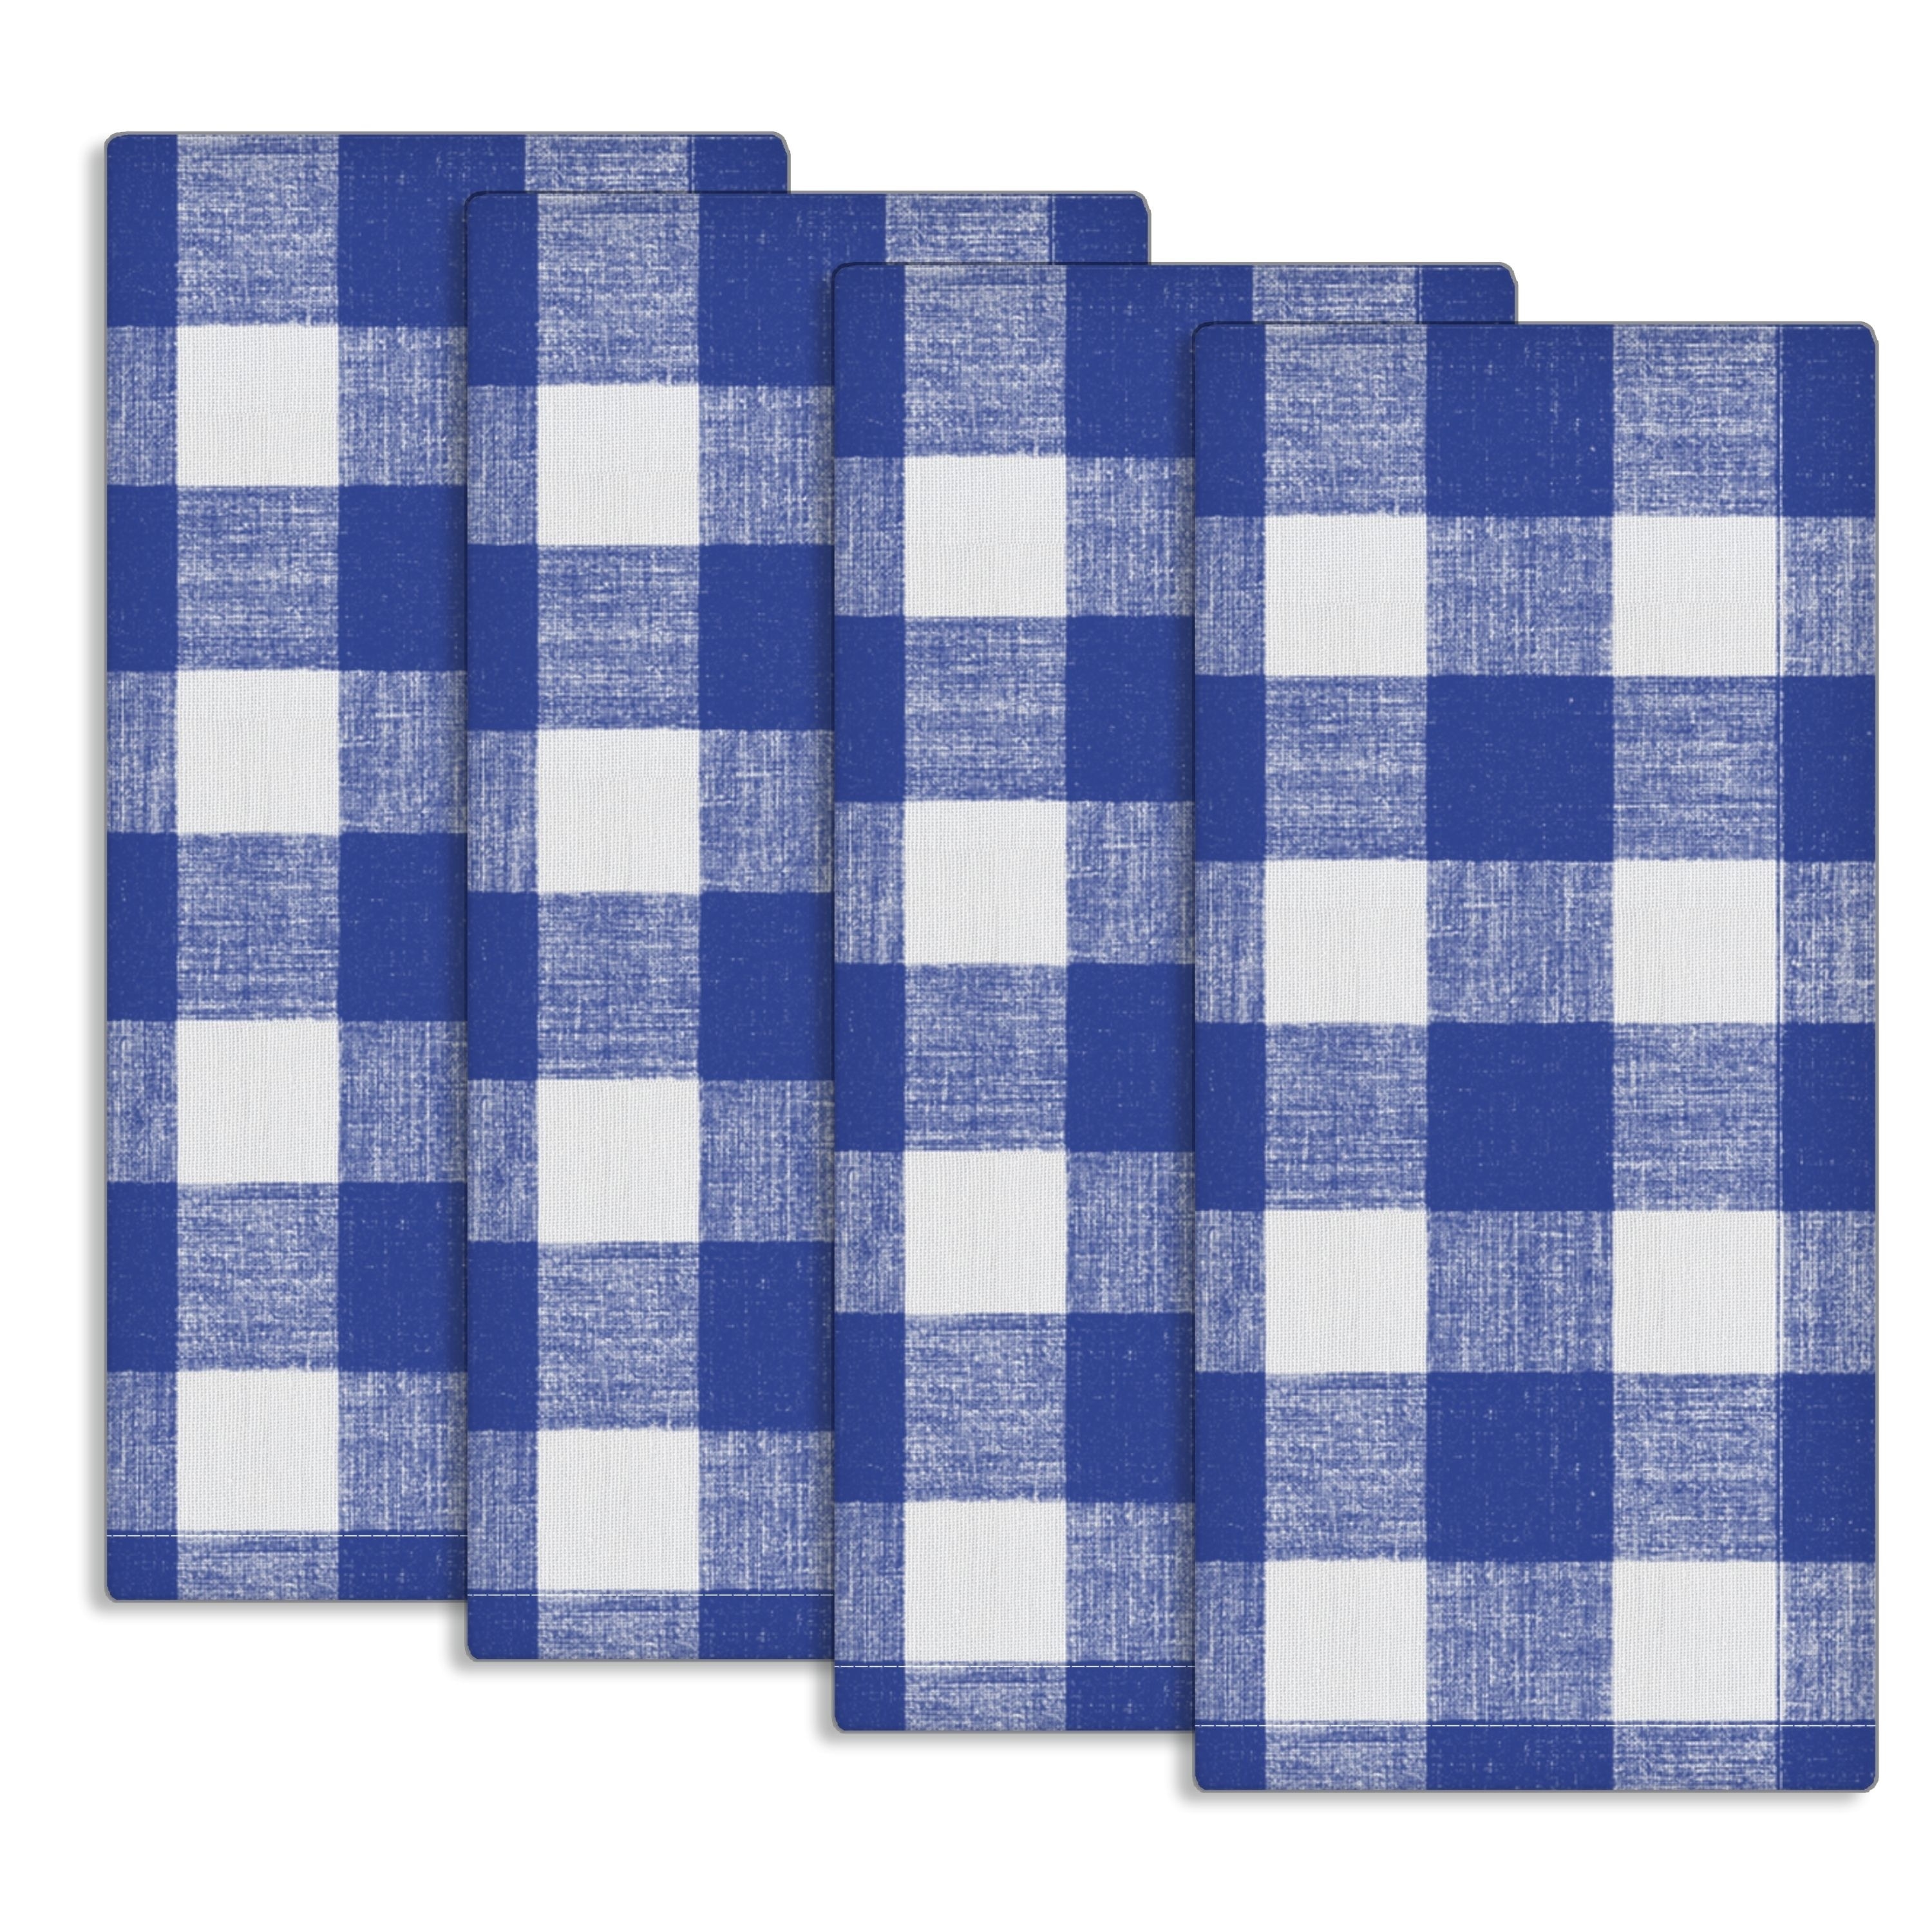 https://ak1.ostkcdn.com/images/products/is/images/direct/107989b72c24f29968e4ee6395ec35ce9acea0bf/Fabstyles-Country-Check-Cotton-Kitchen-Towel-Set-of-4.jpg